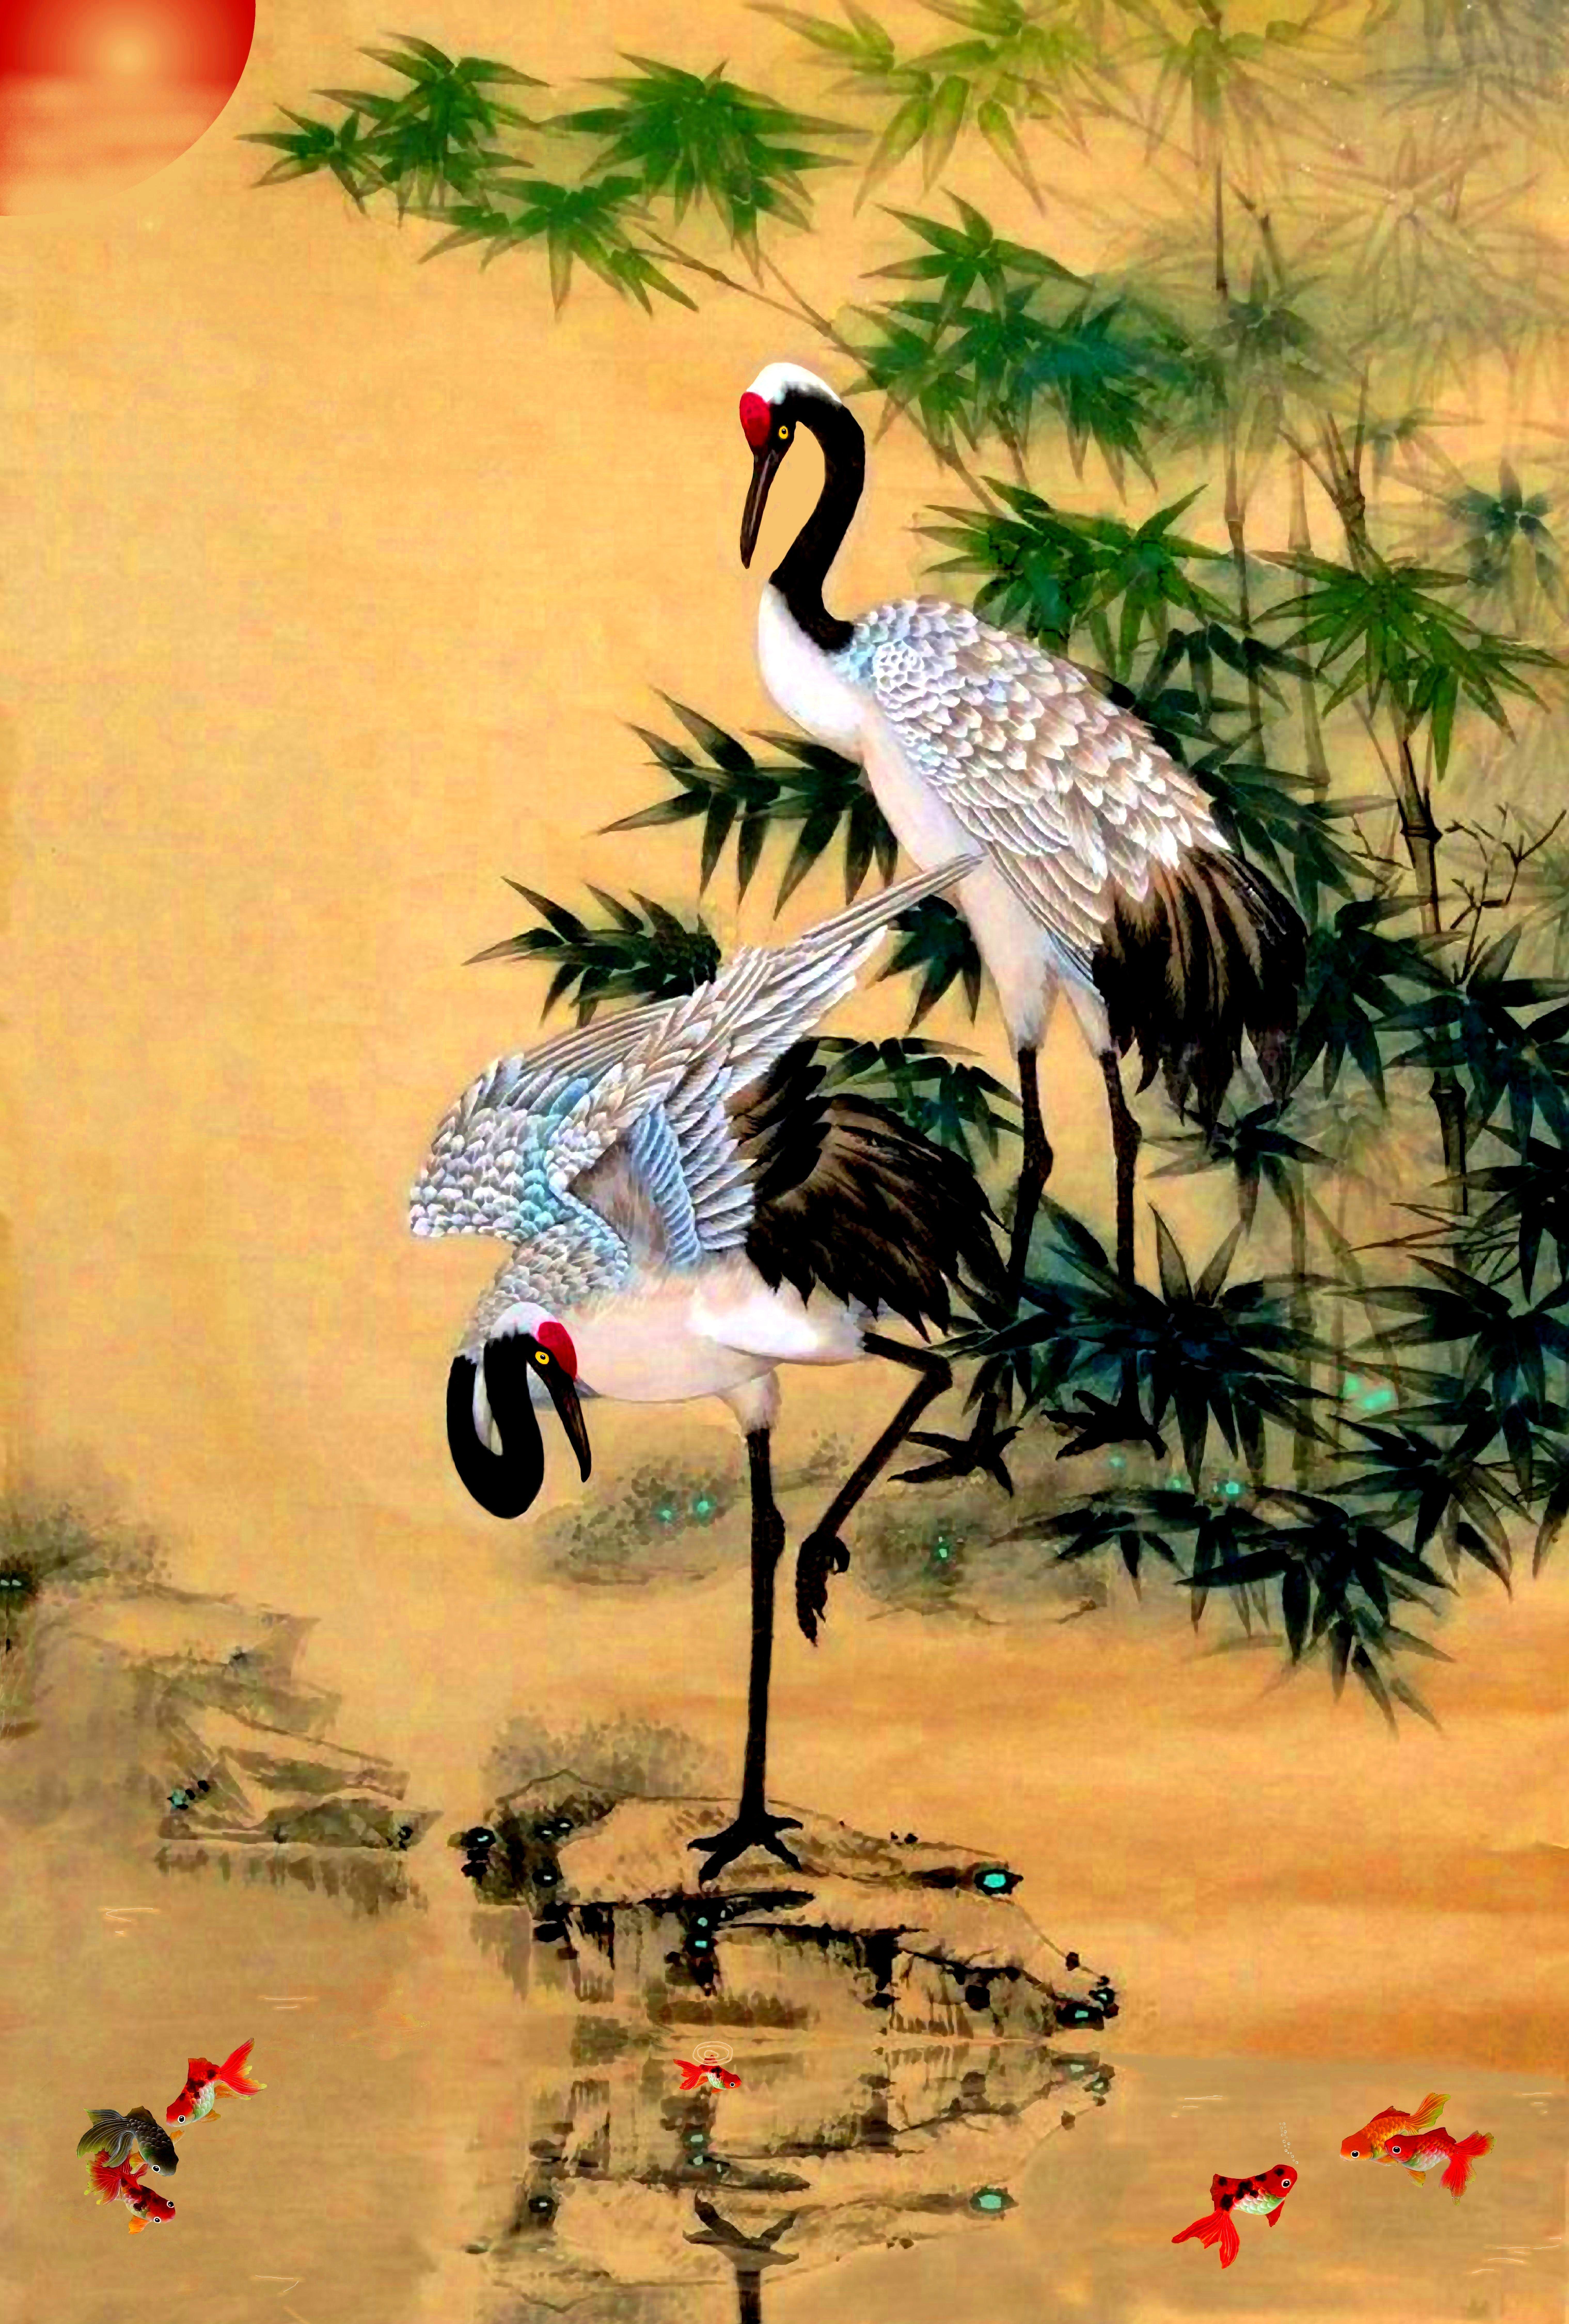 Clay Harris Abstract Painting - Cranes by a Koi Pond